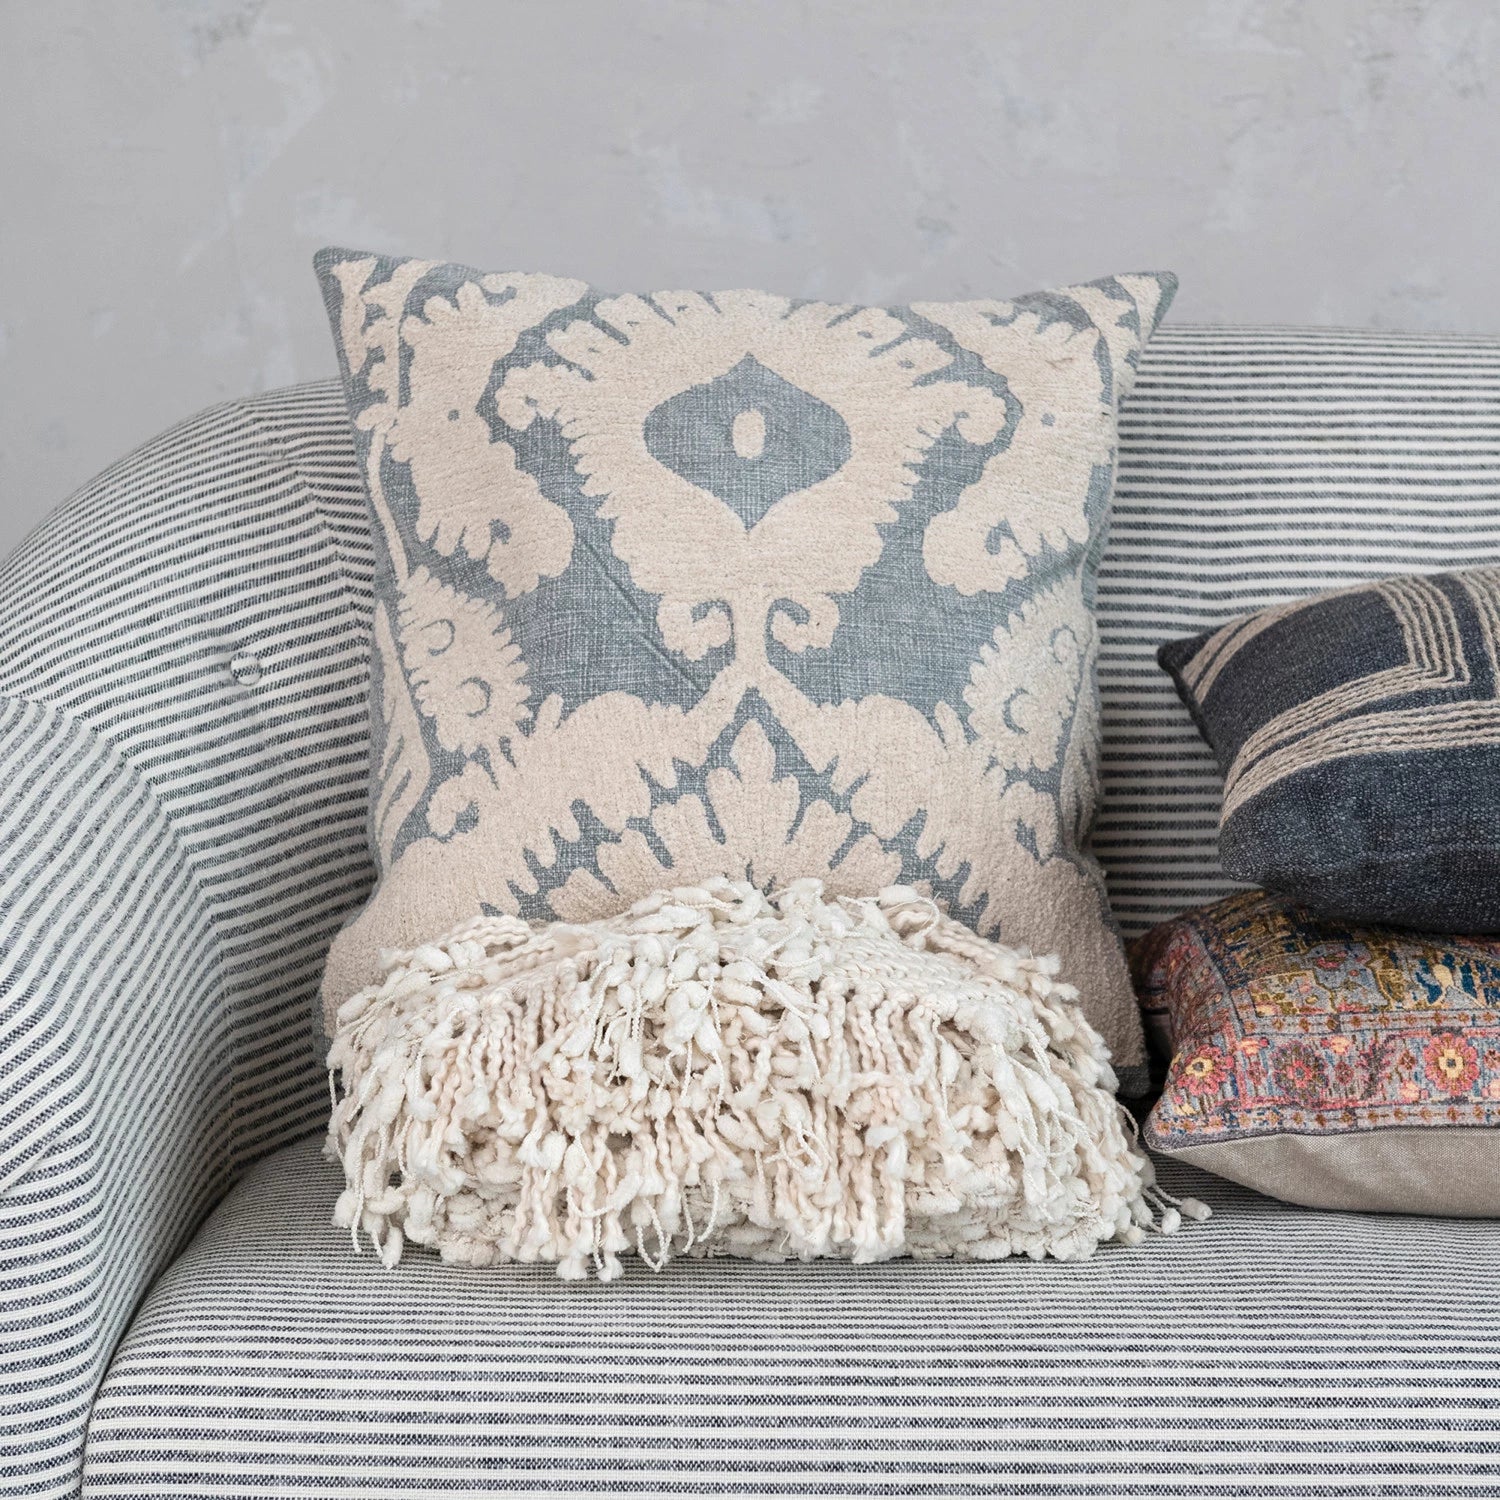 Blue & Cream Damask Tufted Pillow